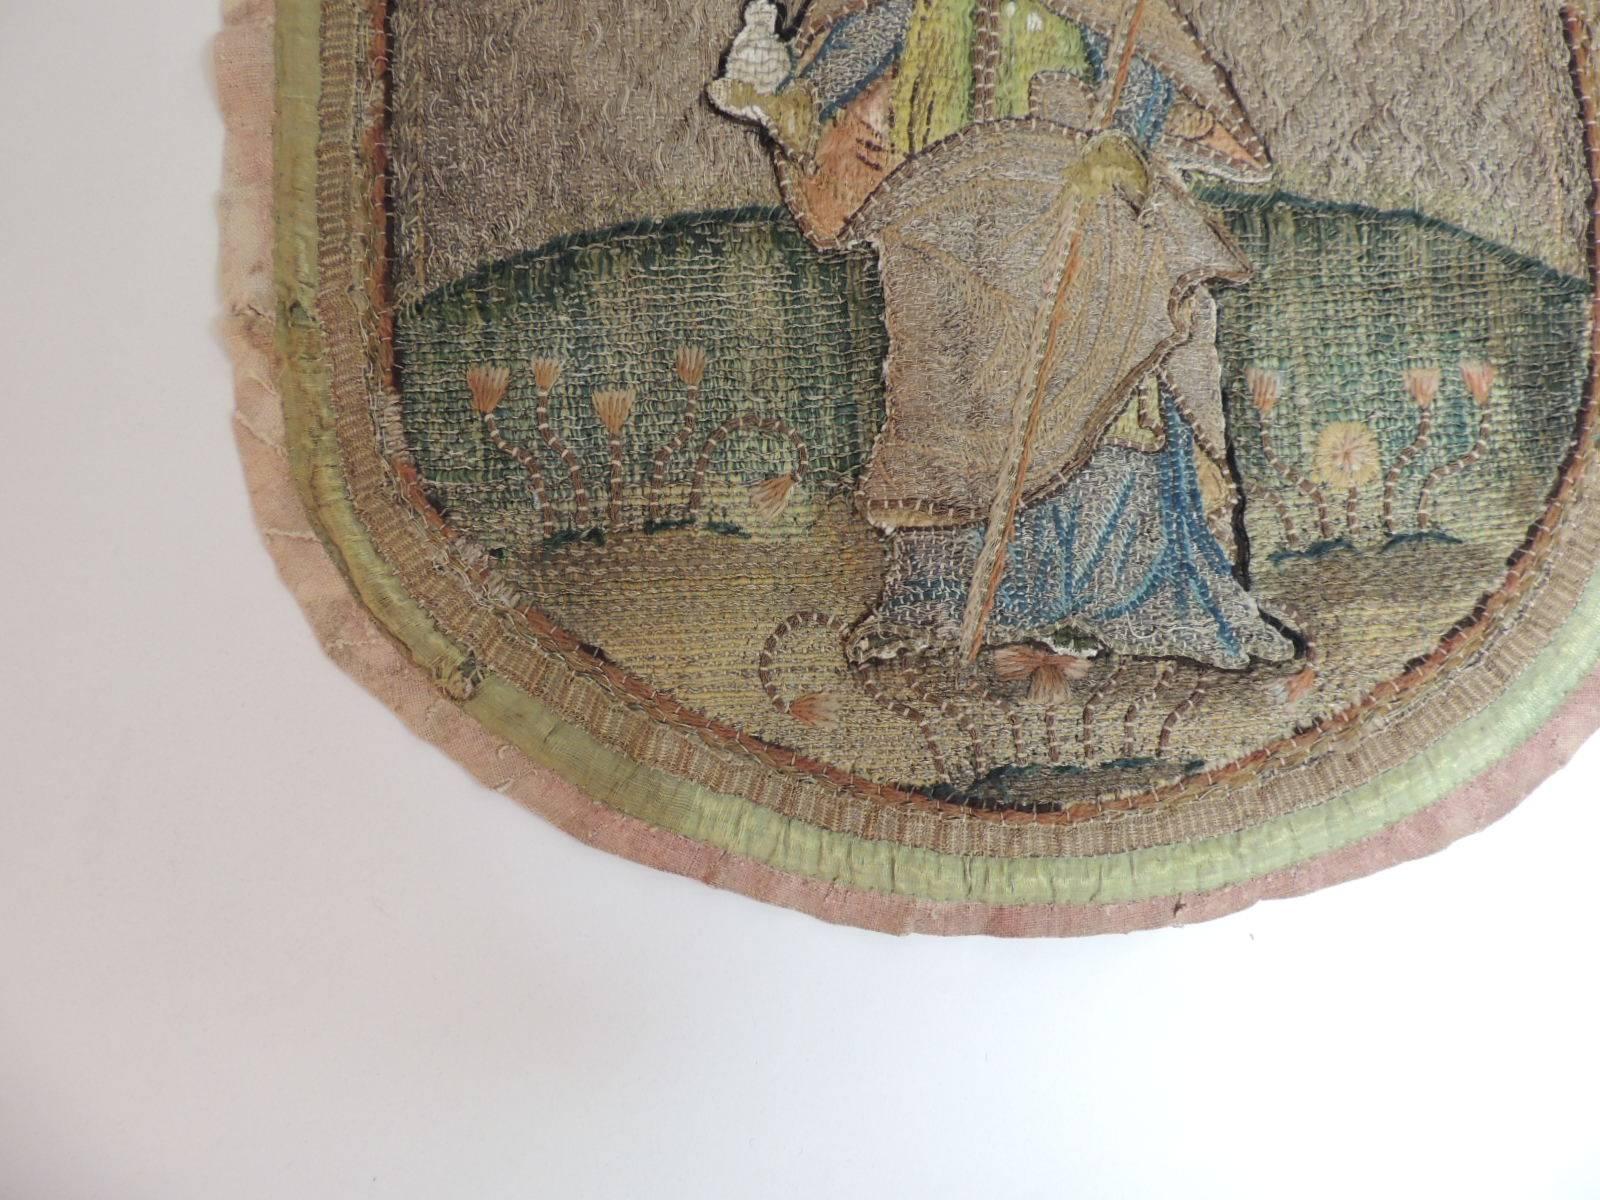 From: Antique Textiles Galleries
Intricate English embroidered fragment depicting St. Paul holding an orb; all rendered with silk and gold threads in closely worked laid and couched stitches. This intricate antique tapestry fragment was handcrafted